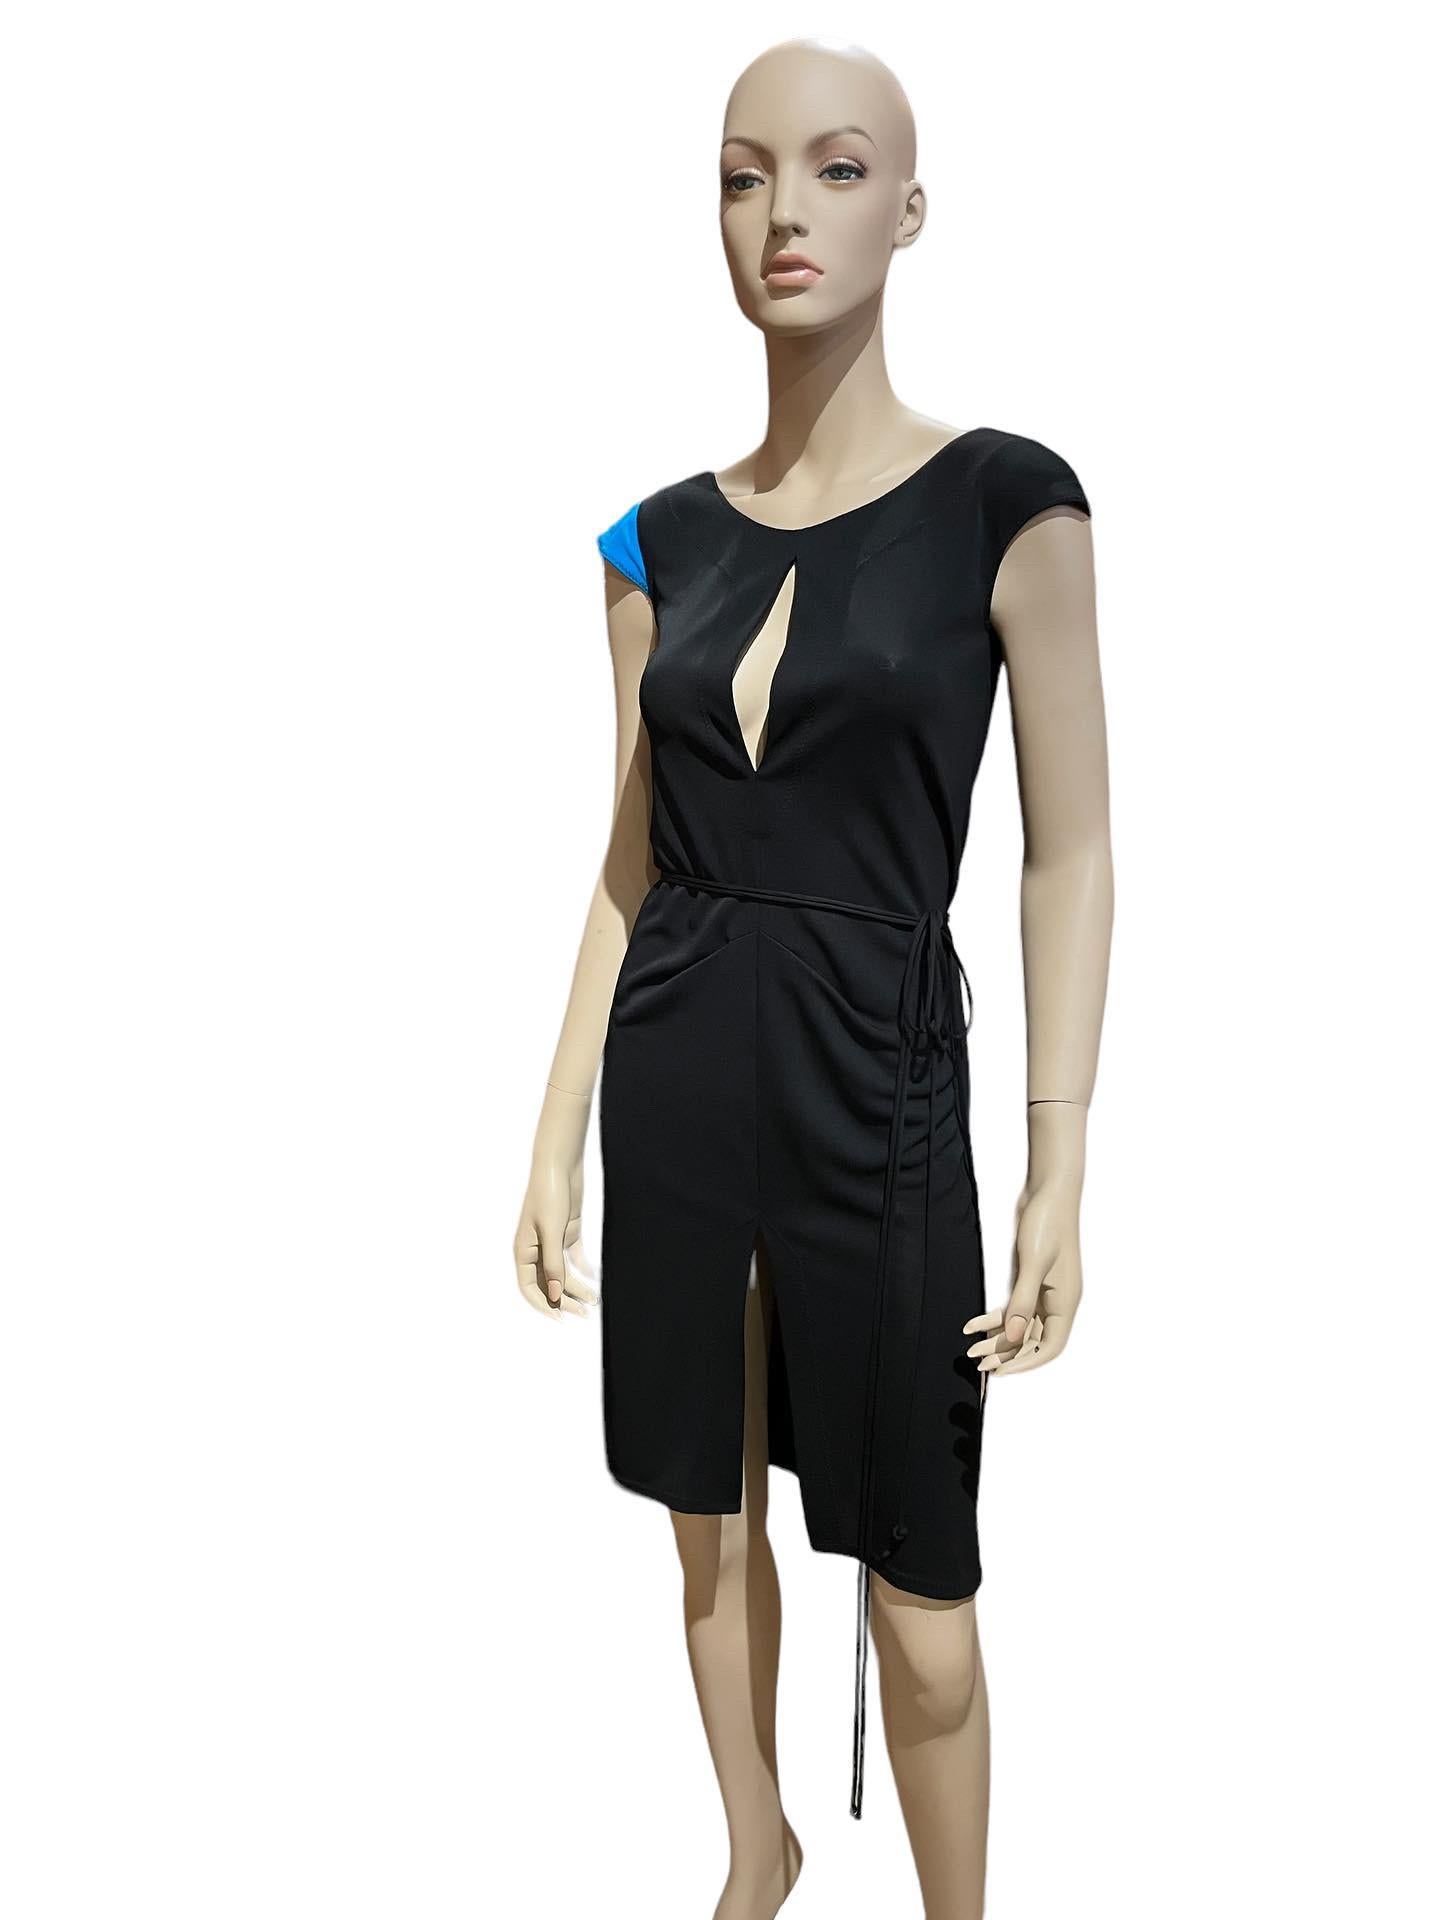 Y2K Stephen Burrows Jersey Wrap Dress

Iconic black jersey wrap dress by the incredible world renowned designer Stephen Burrows. Beautiful open back with a touch of blue on the right shoulder. This piece is a rare find in excellent condition!

Size